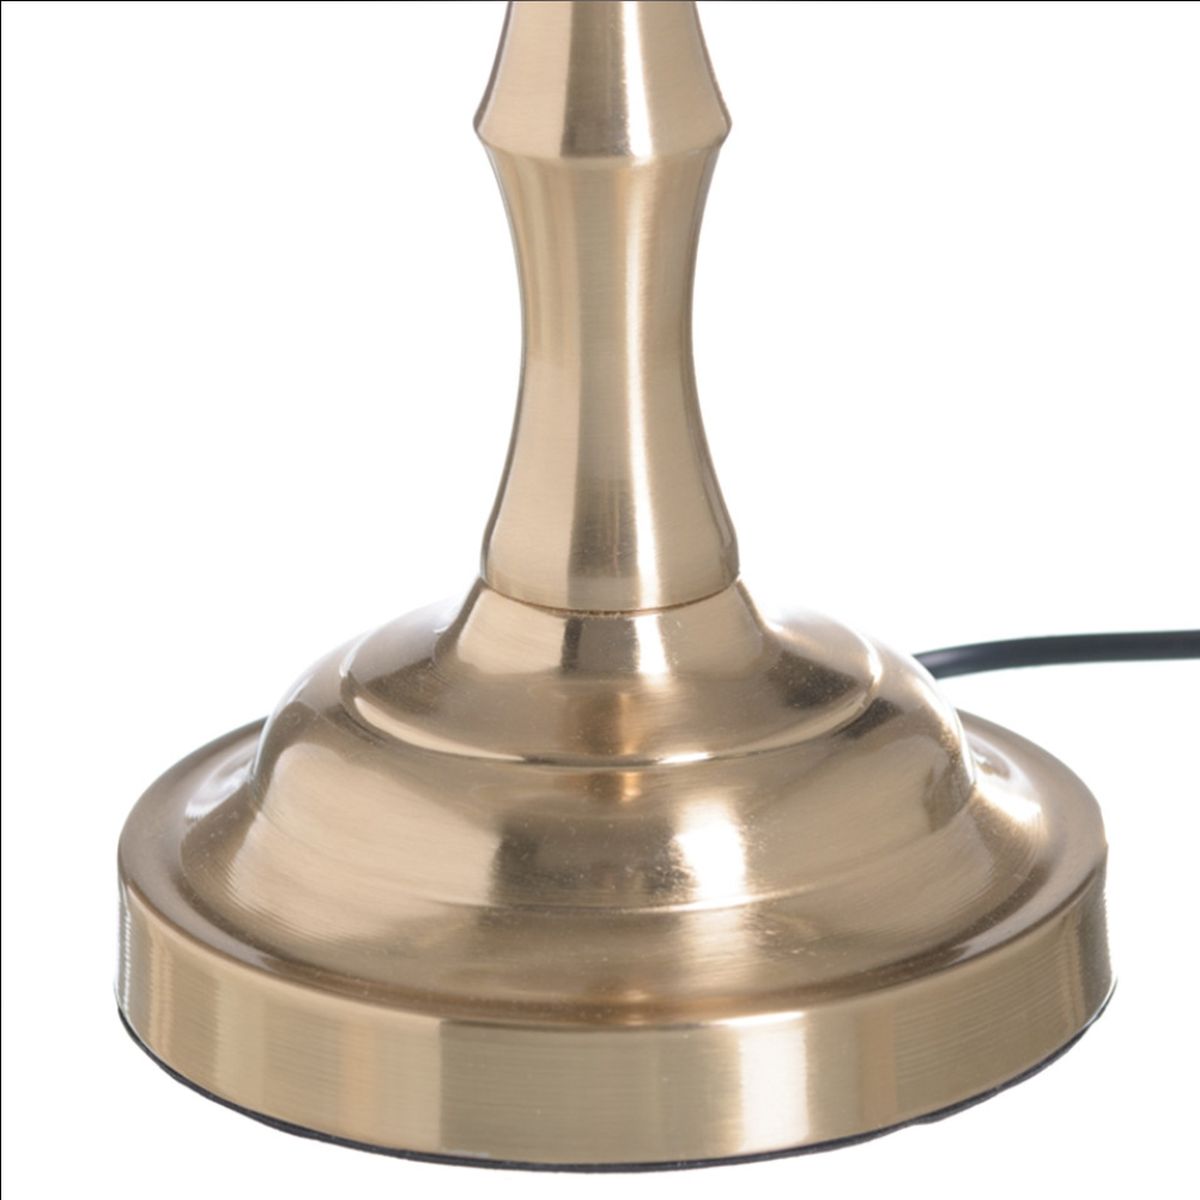 Table lamp in metal, gold color